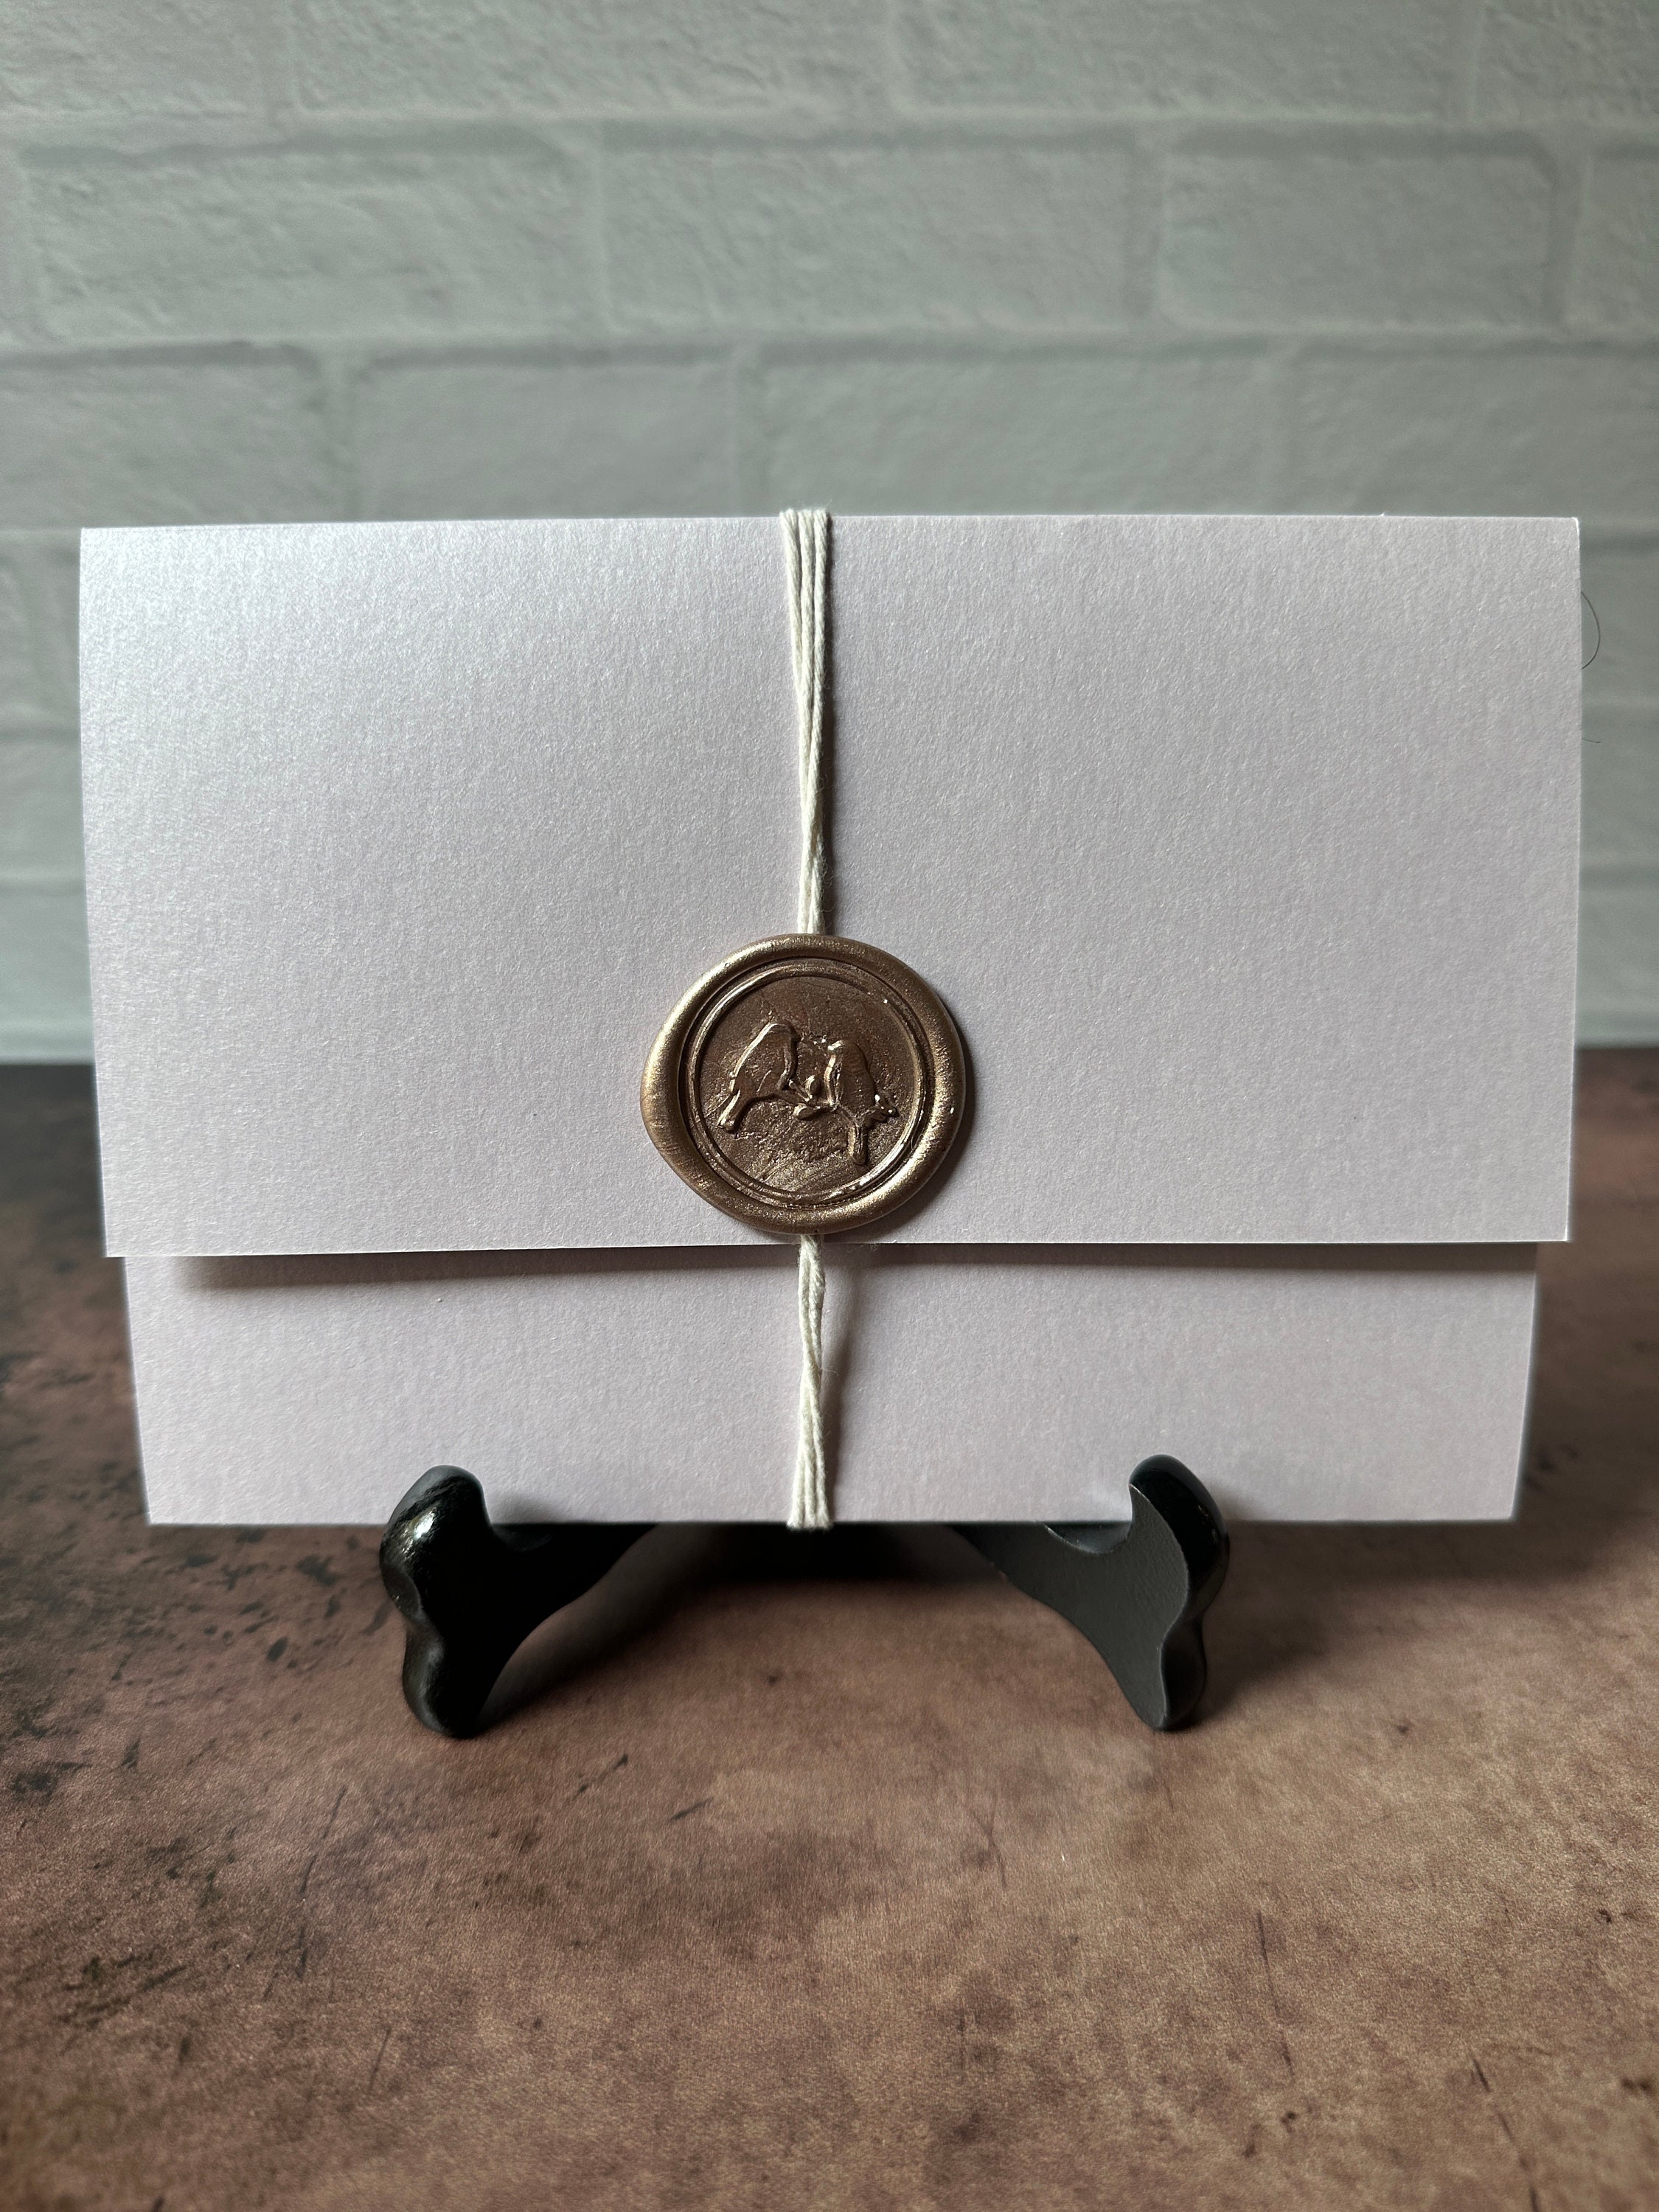 Best Day Ever Wax Seal (Formal) — CZ INVITATIONS